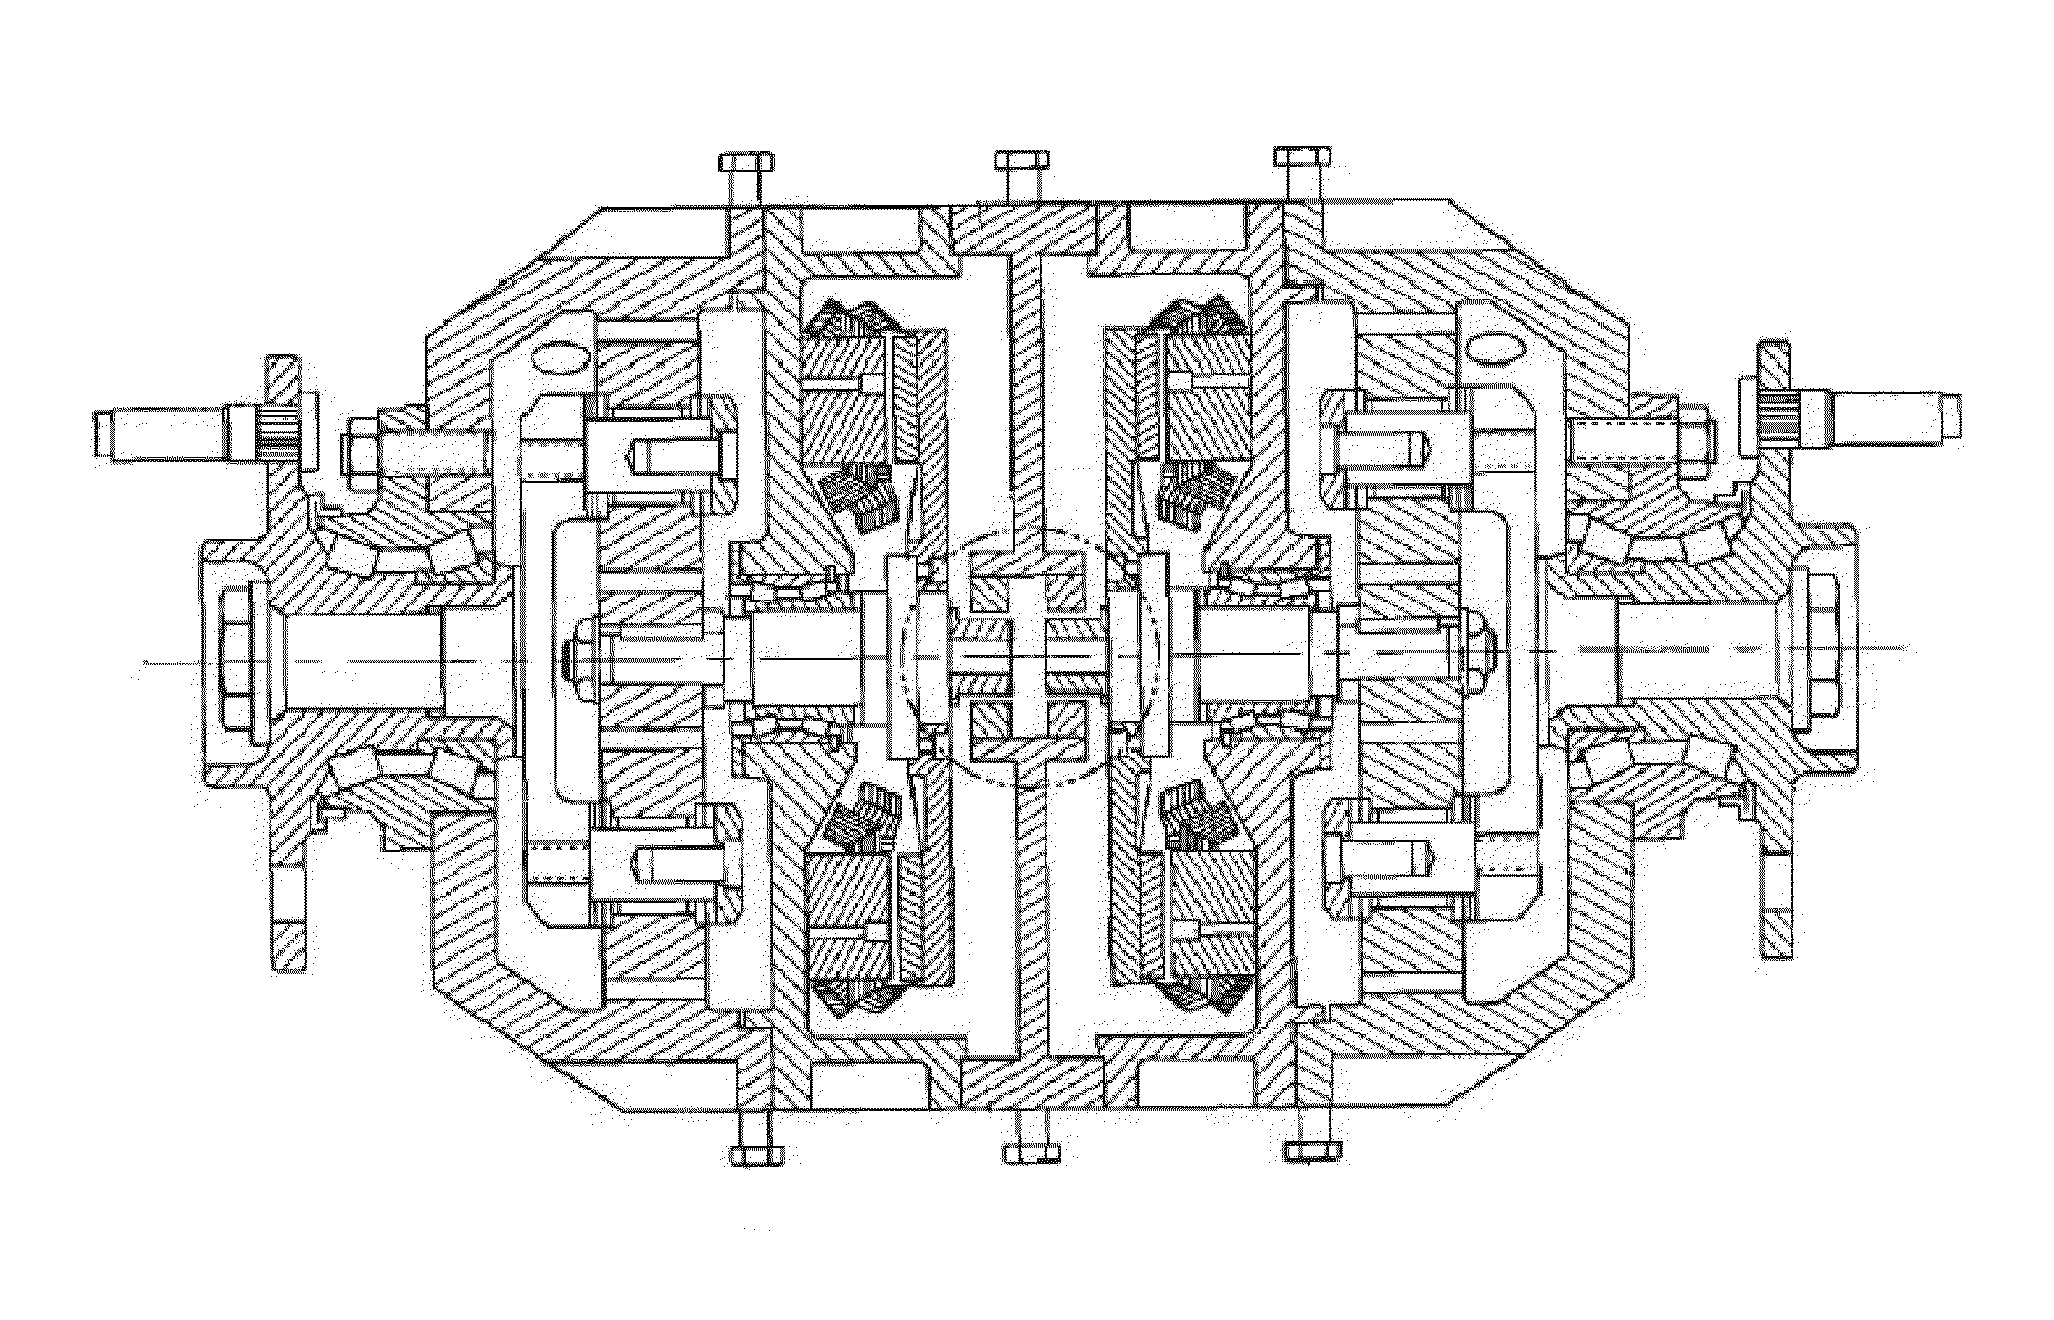 Stator assembly structure for axial flux electric machine